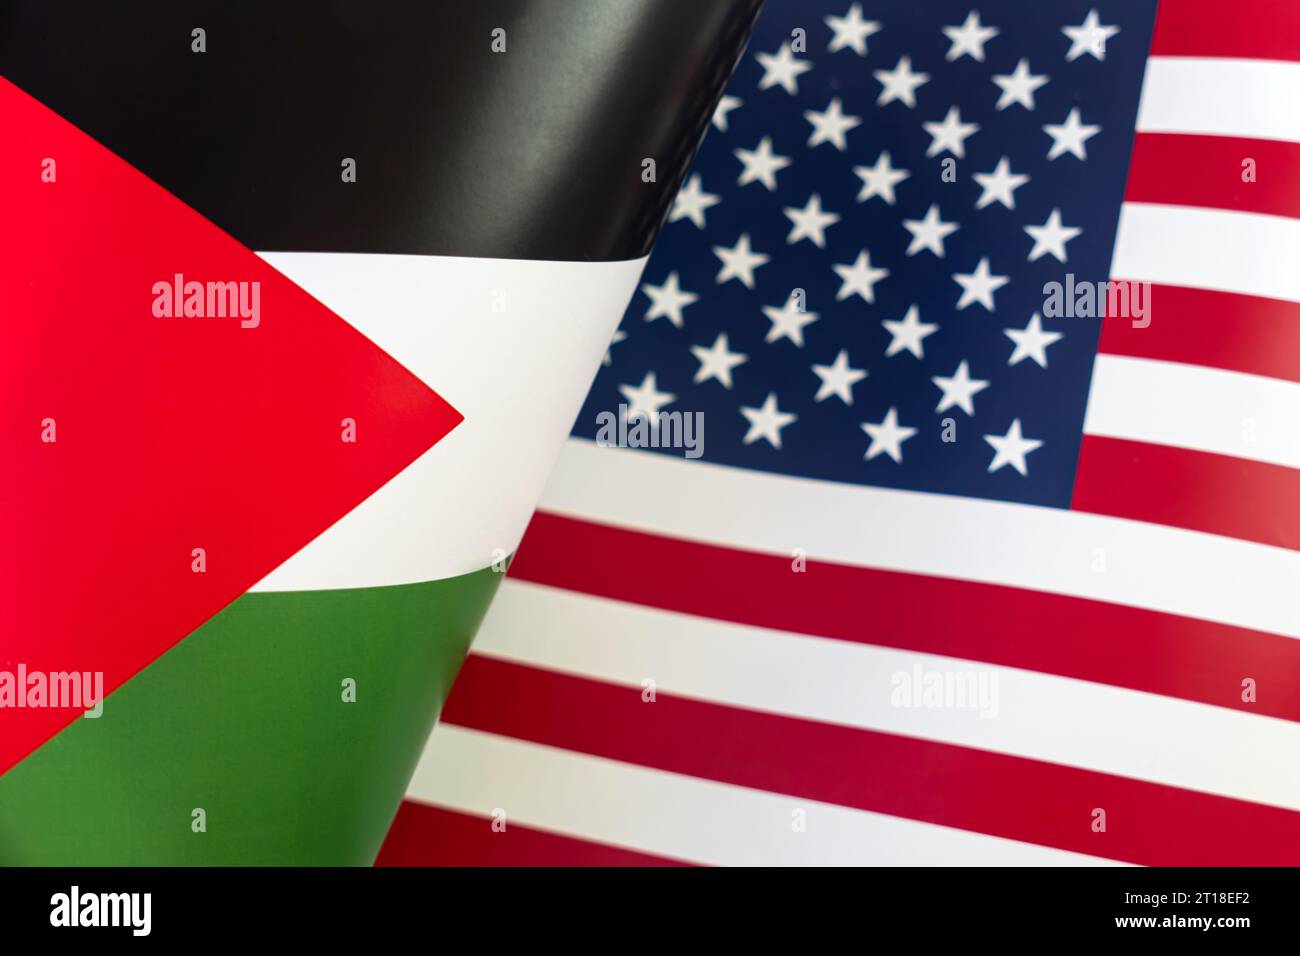 Background of the flags of the Palestine, USA. The concept of interaction or counteraction between the two countries. International relations. politic Stock Photo